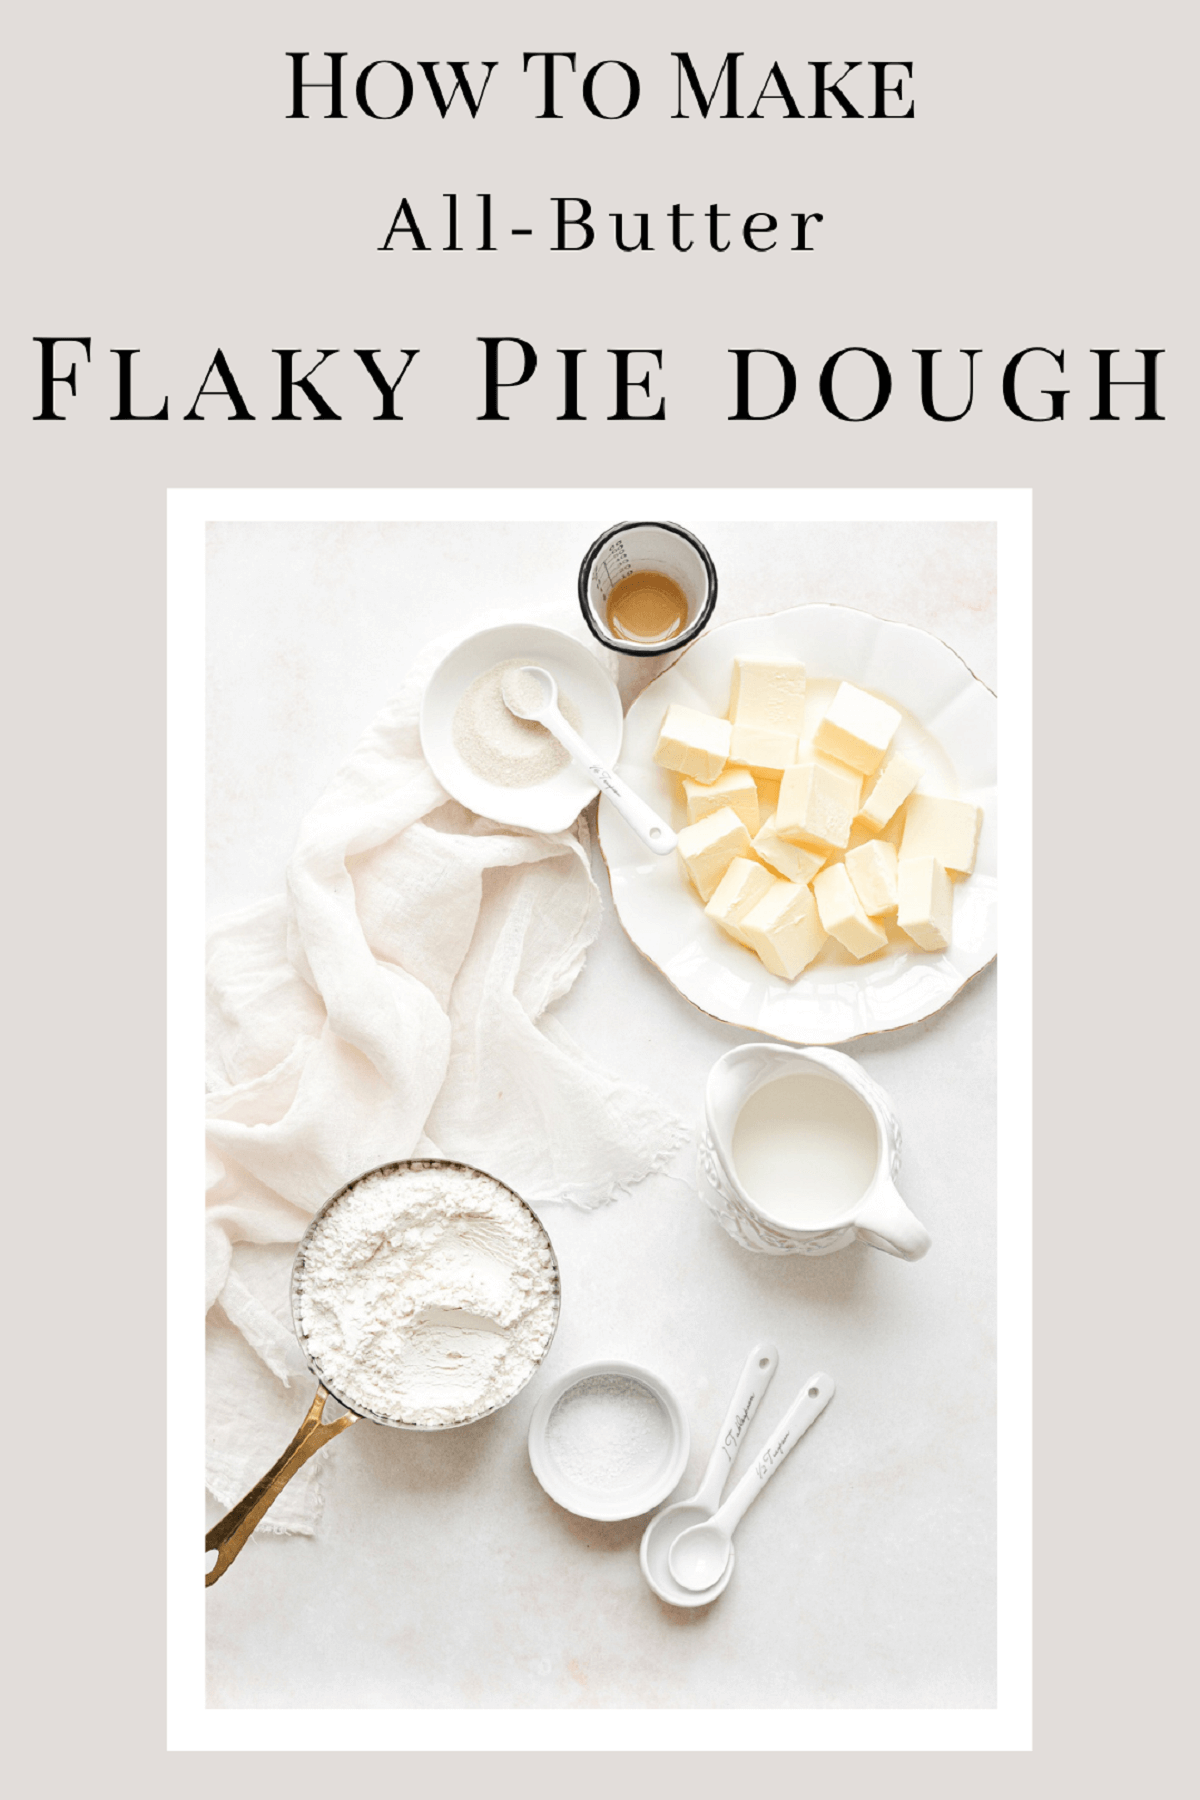 A graphic on how to make flaky pie dough.